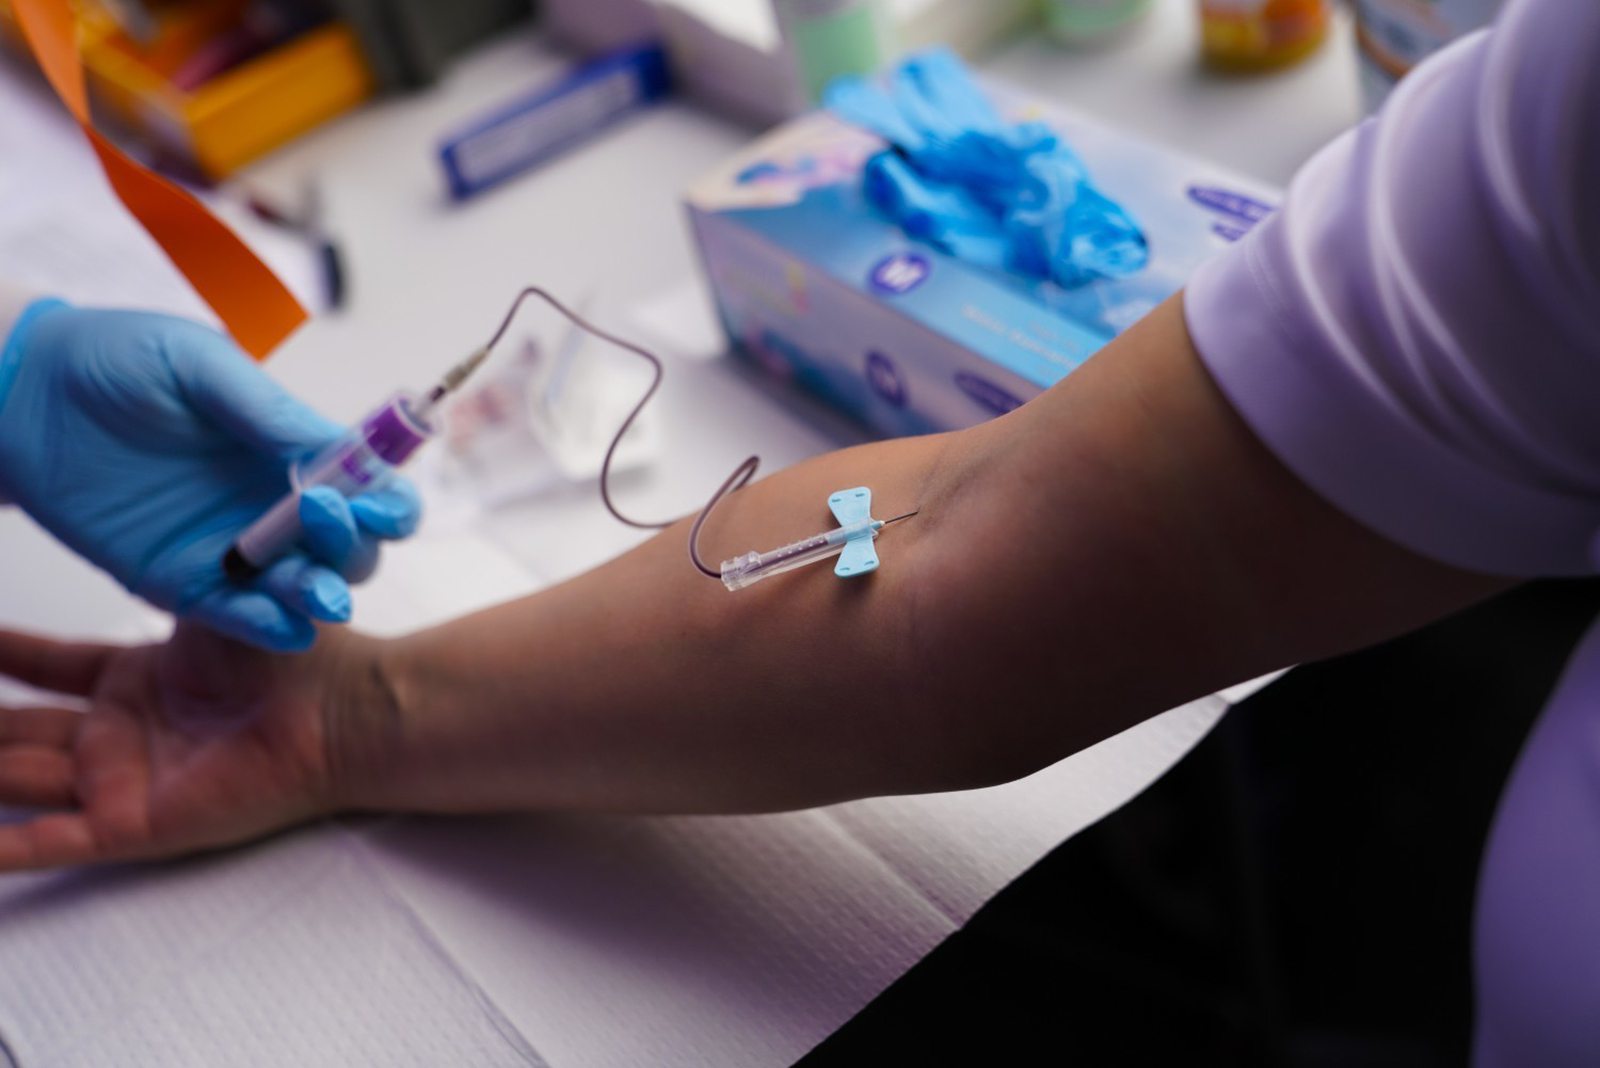 How do blood tests work?